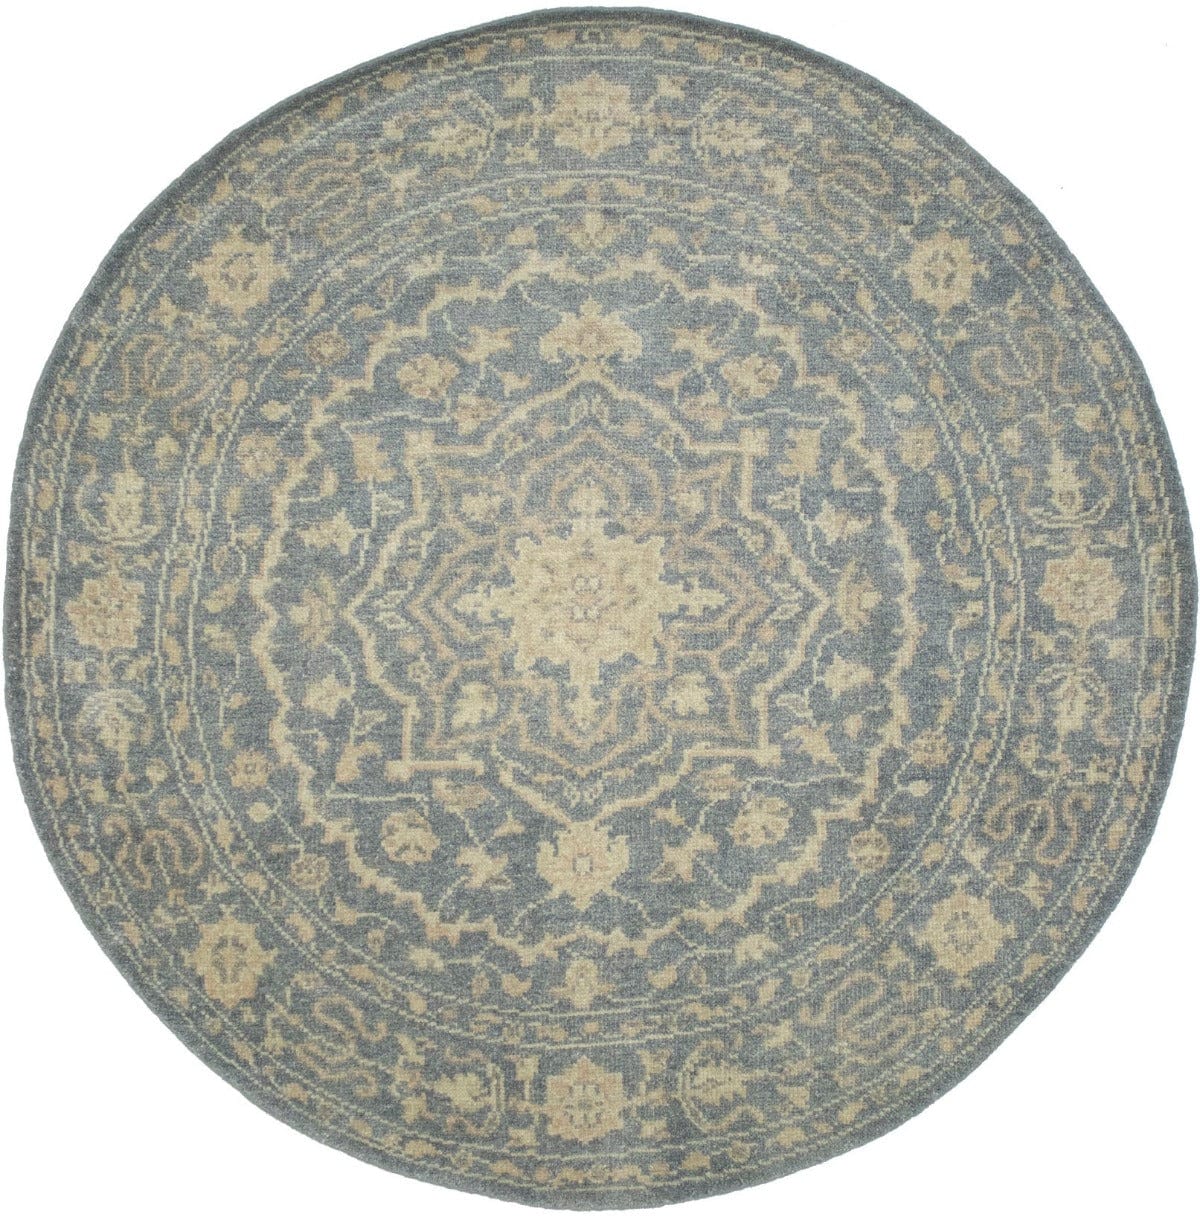 Slate Floral Transitional 6X6 Oriental Round Rug